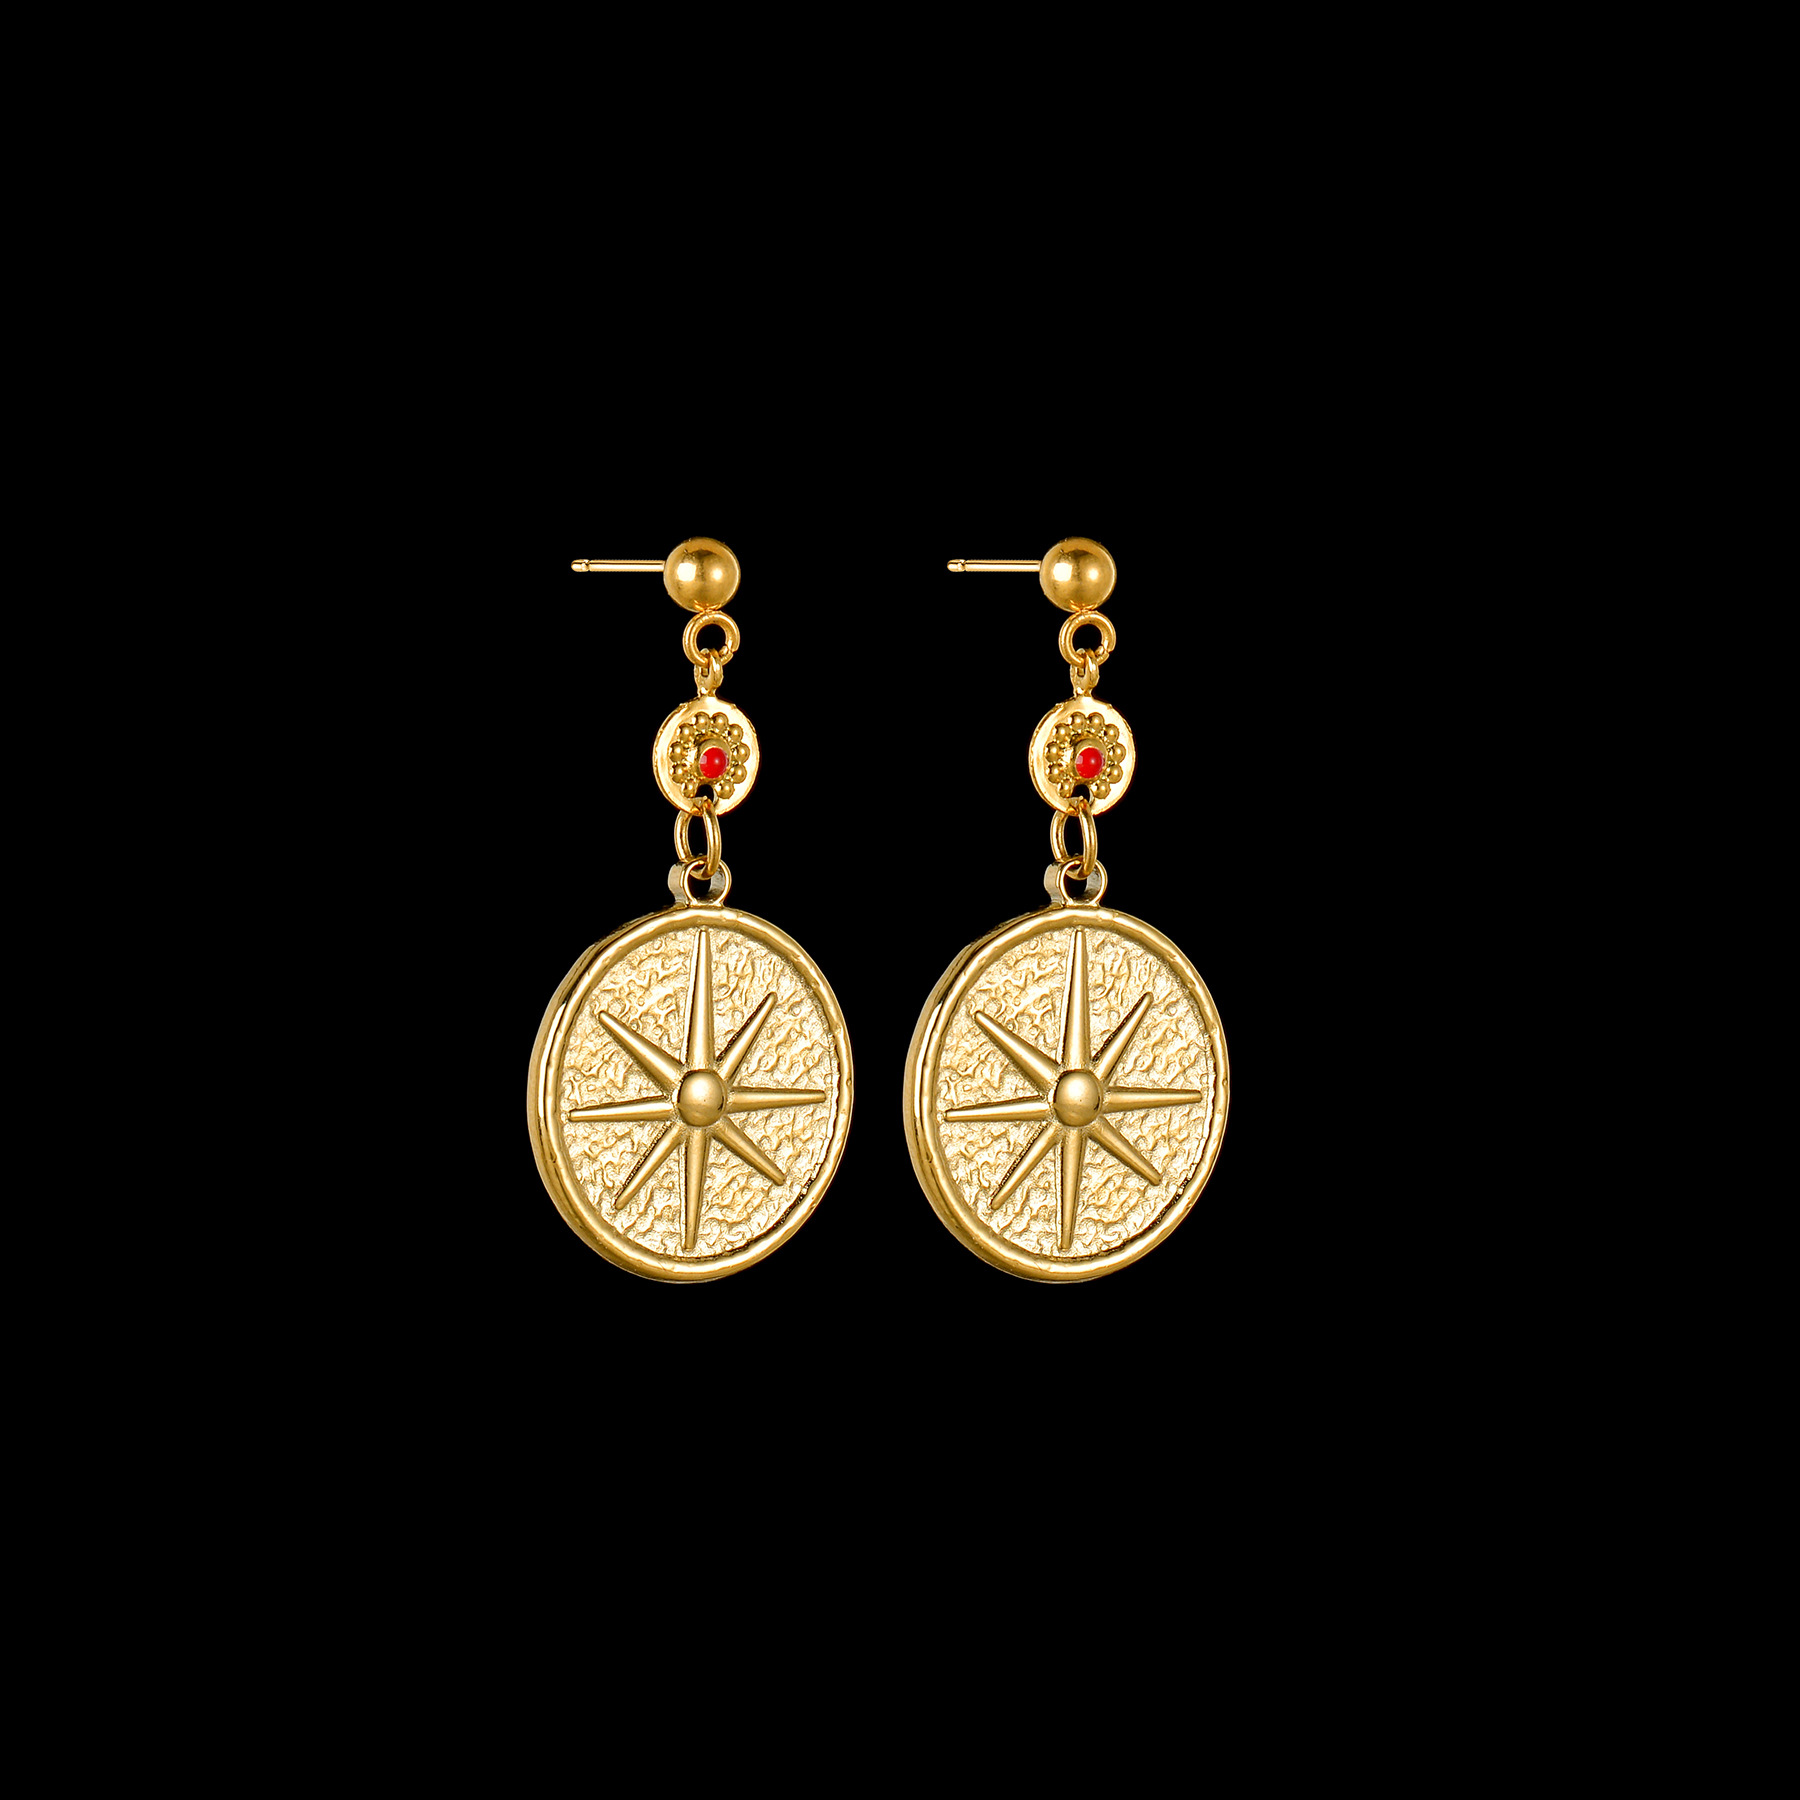 1:Eight-pointed star earrings